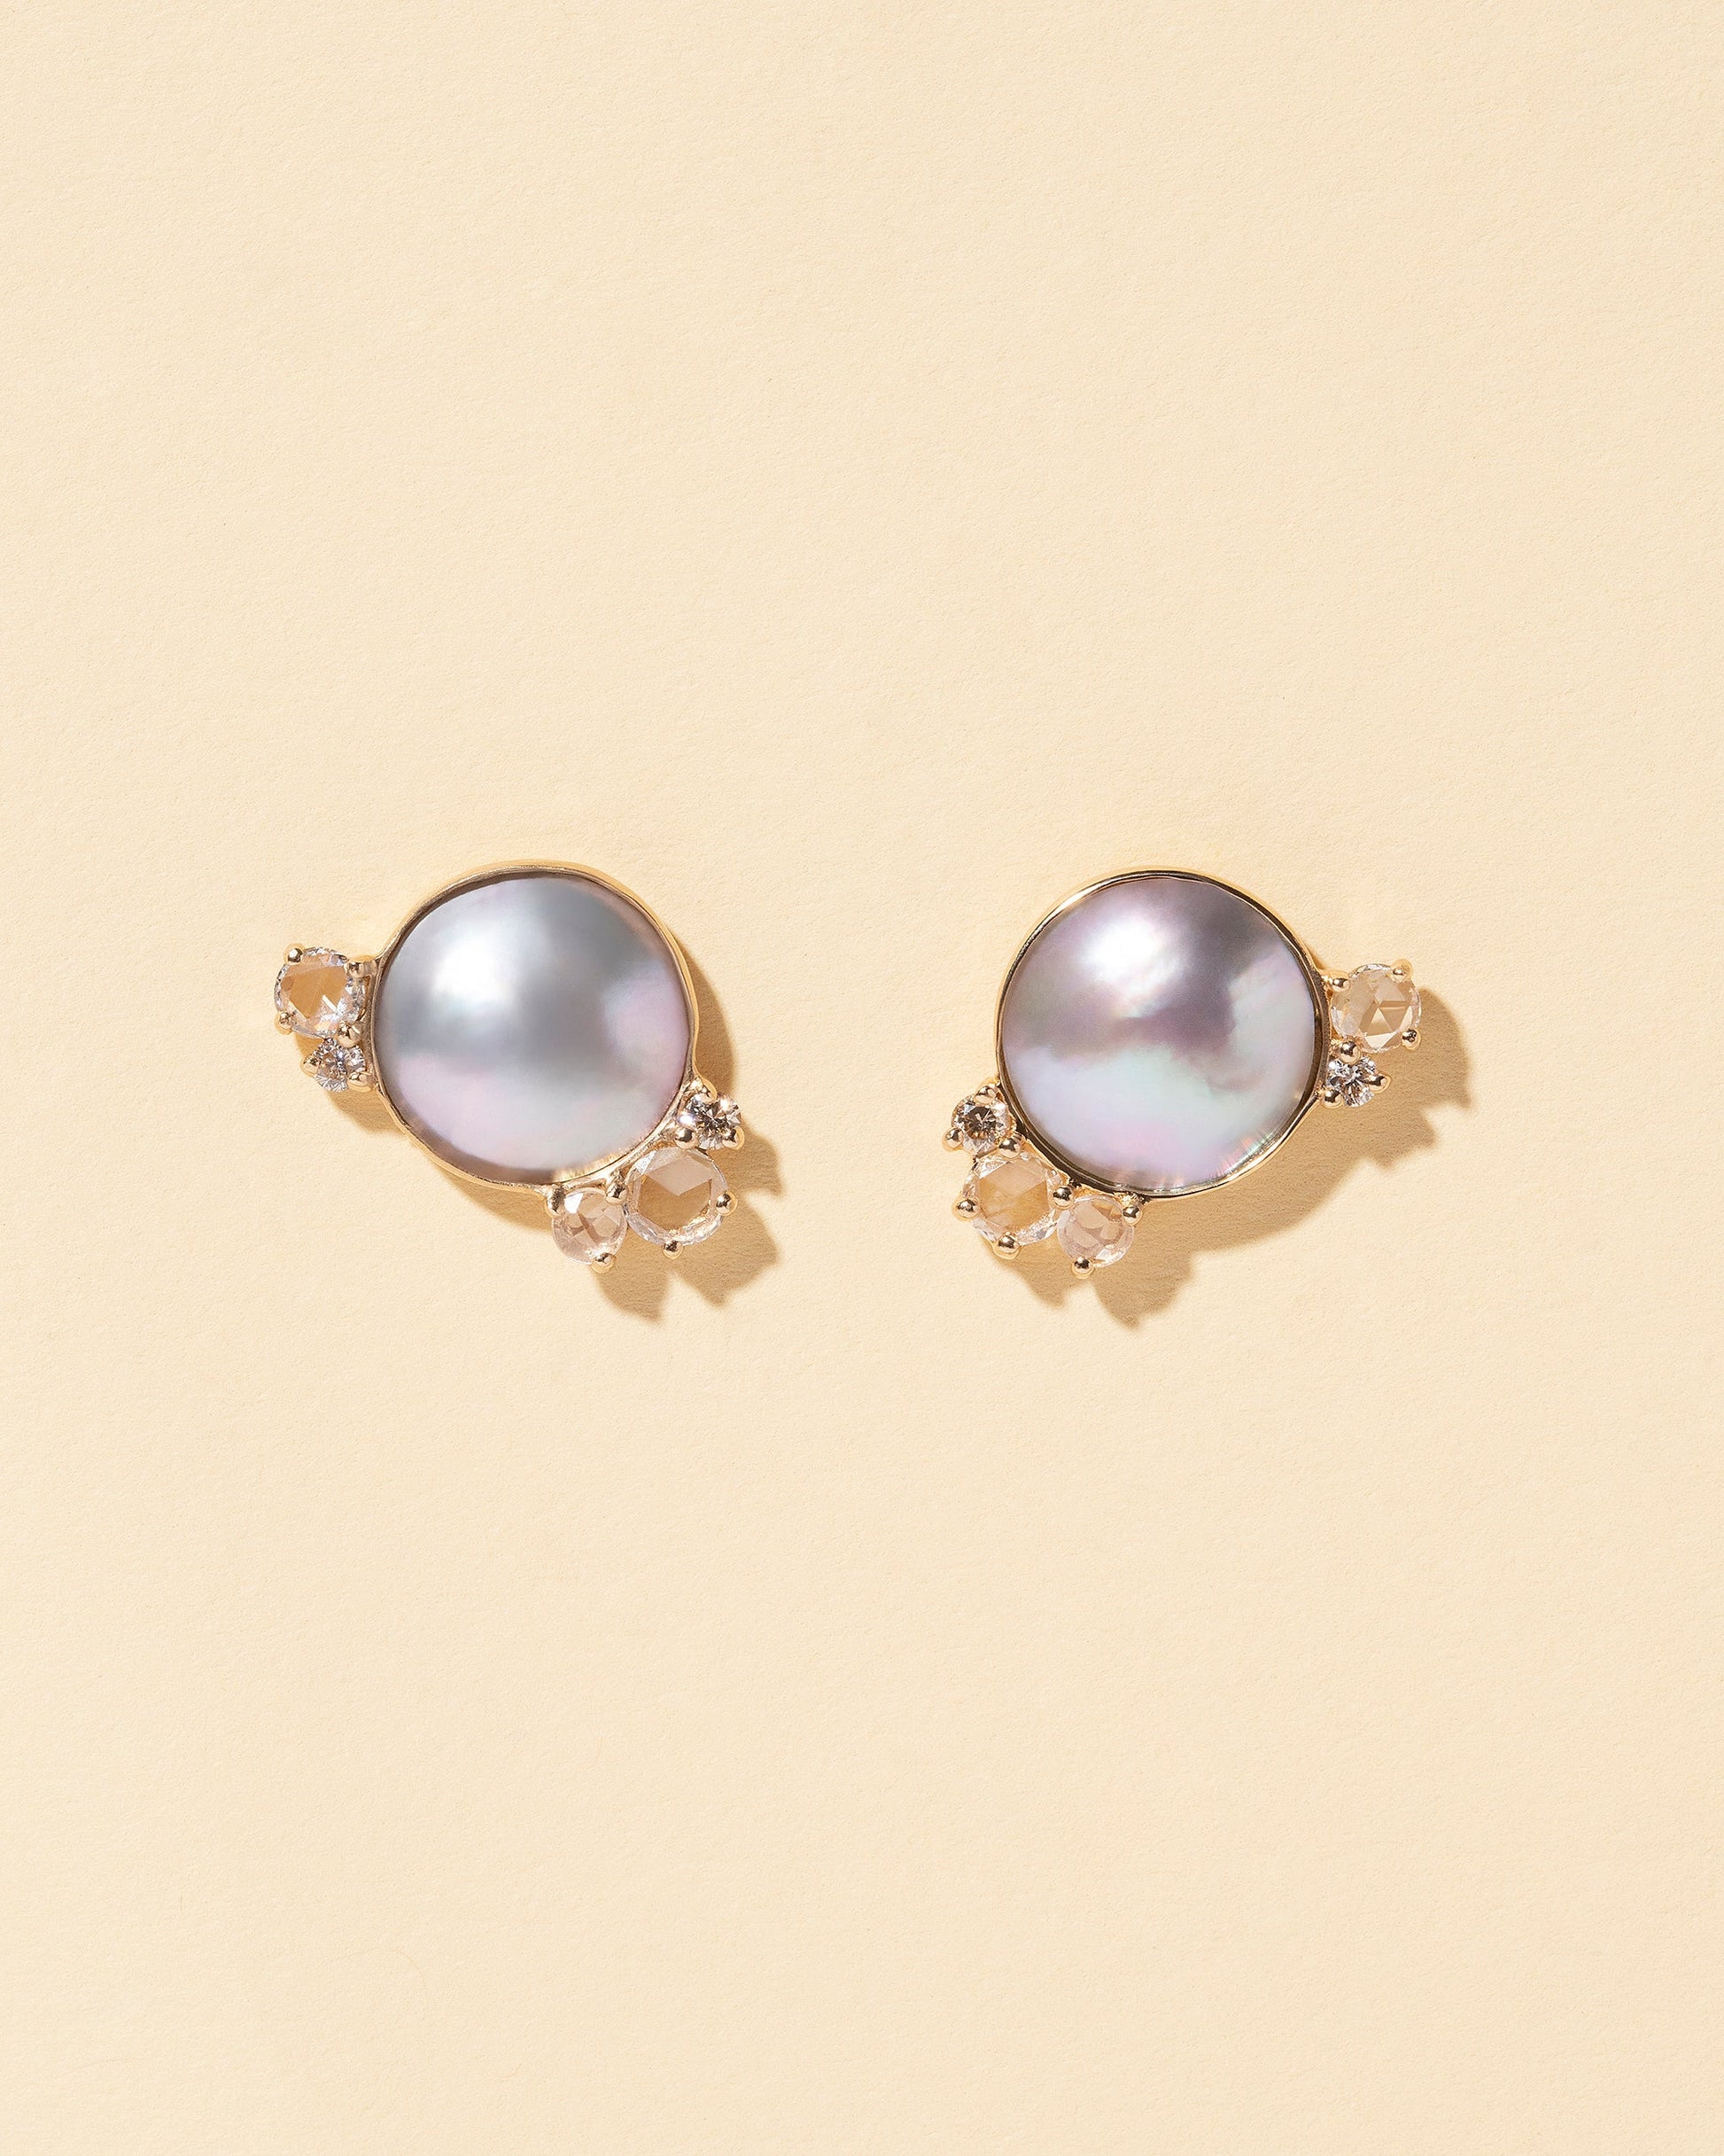  Mabe Pearl Cluster Earrings on light color background.